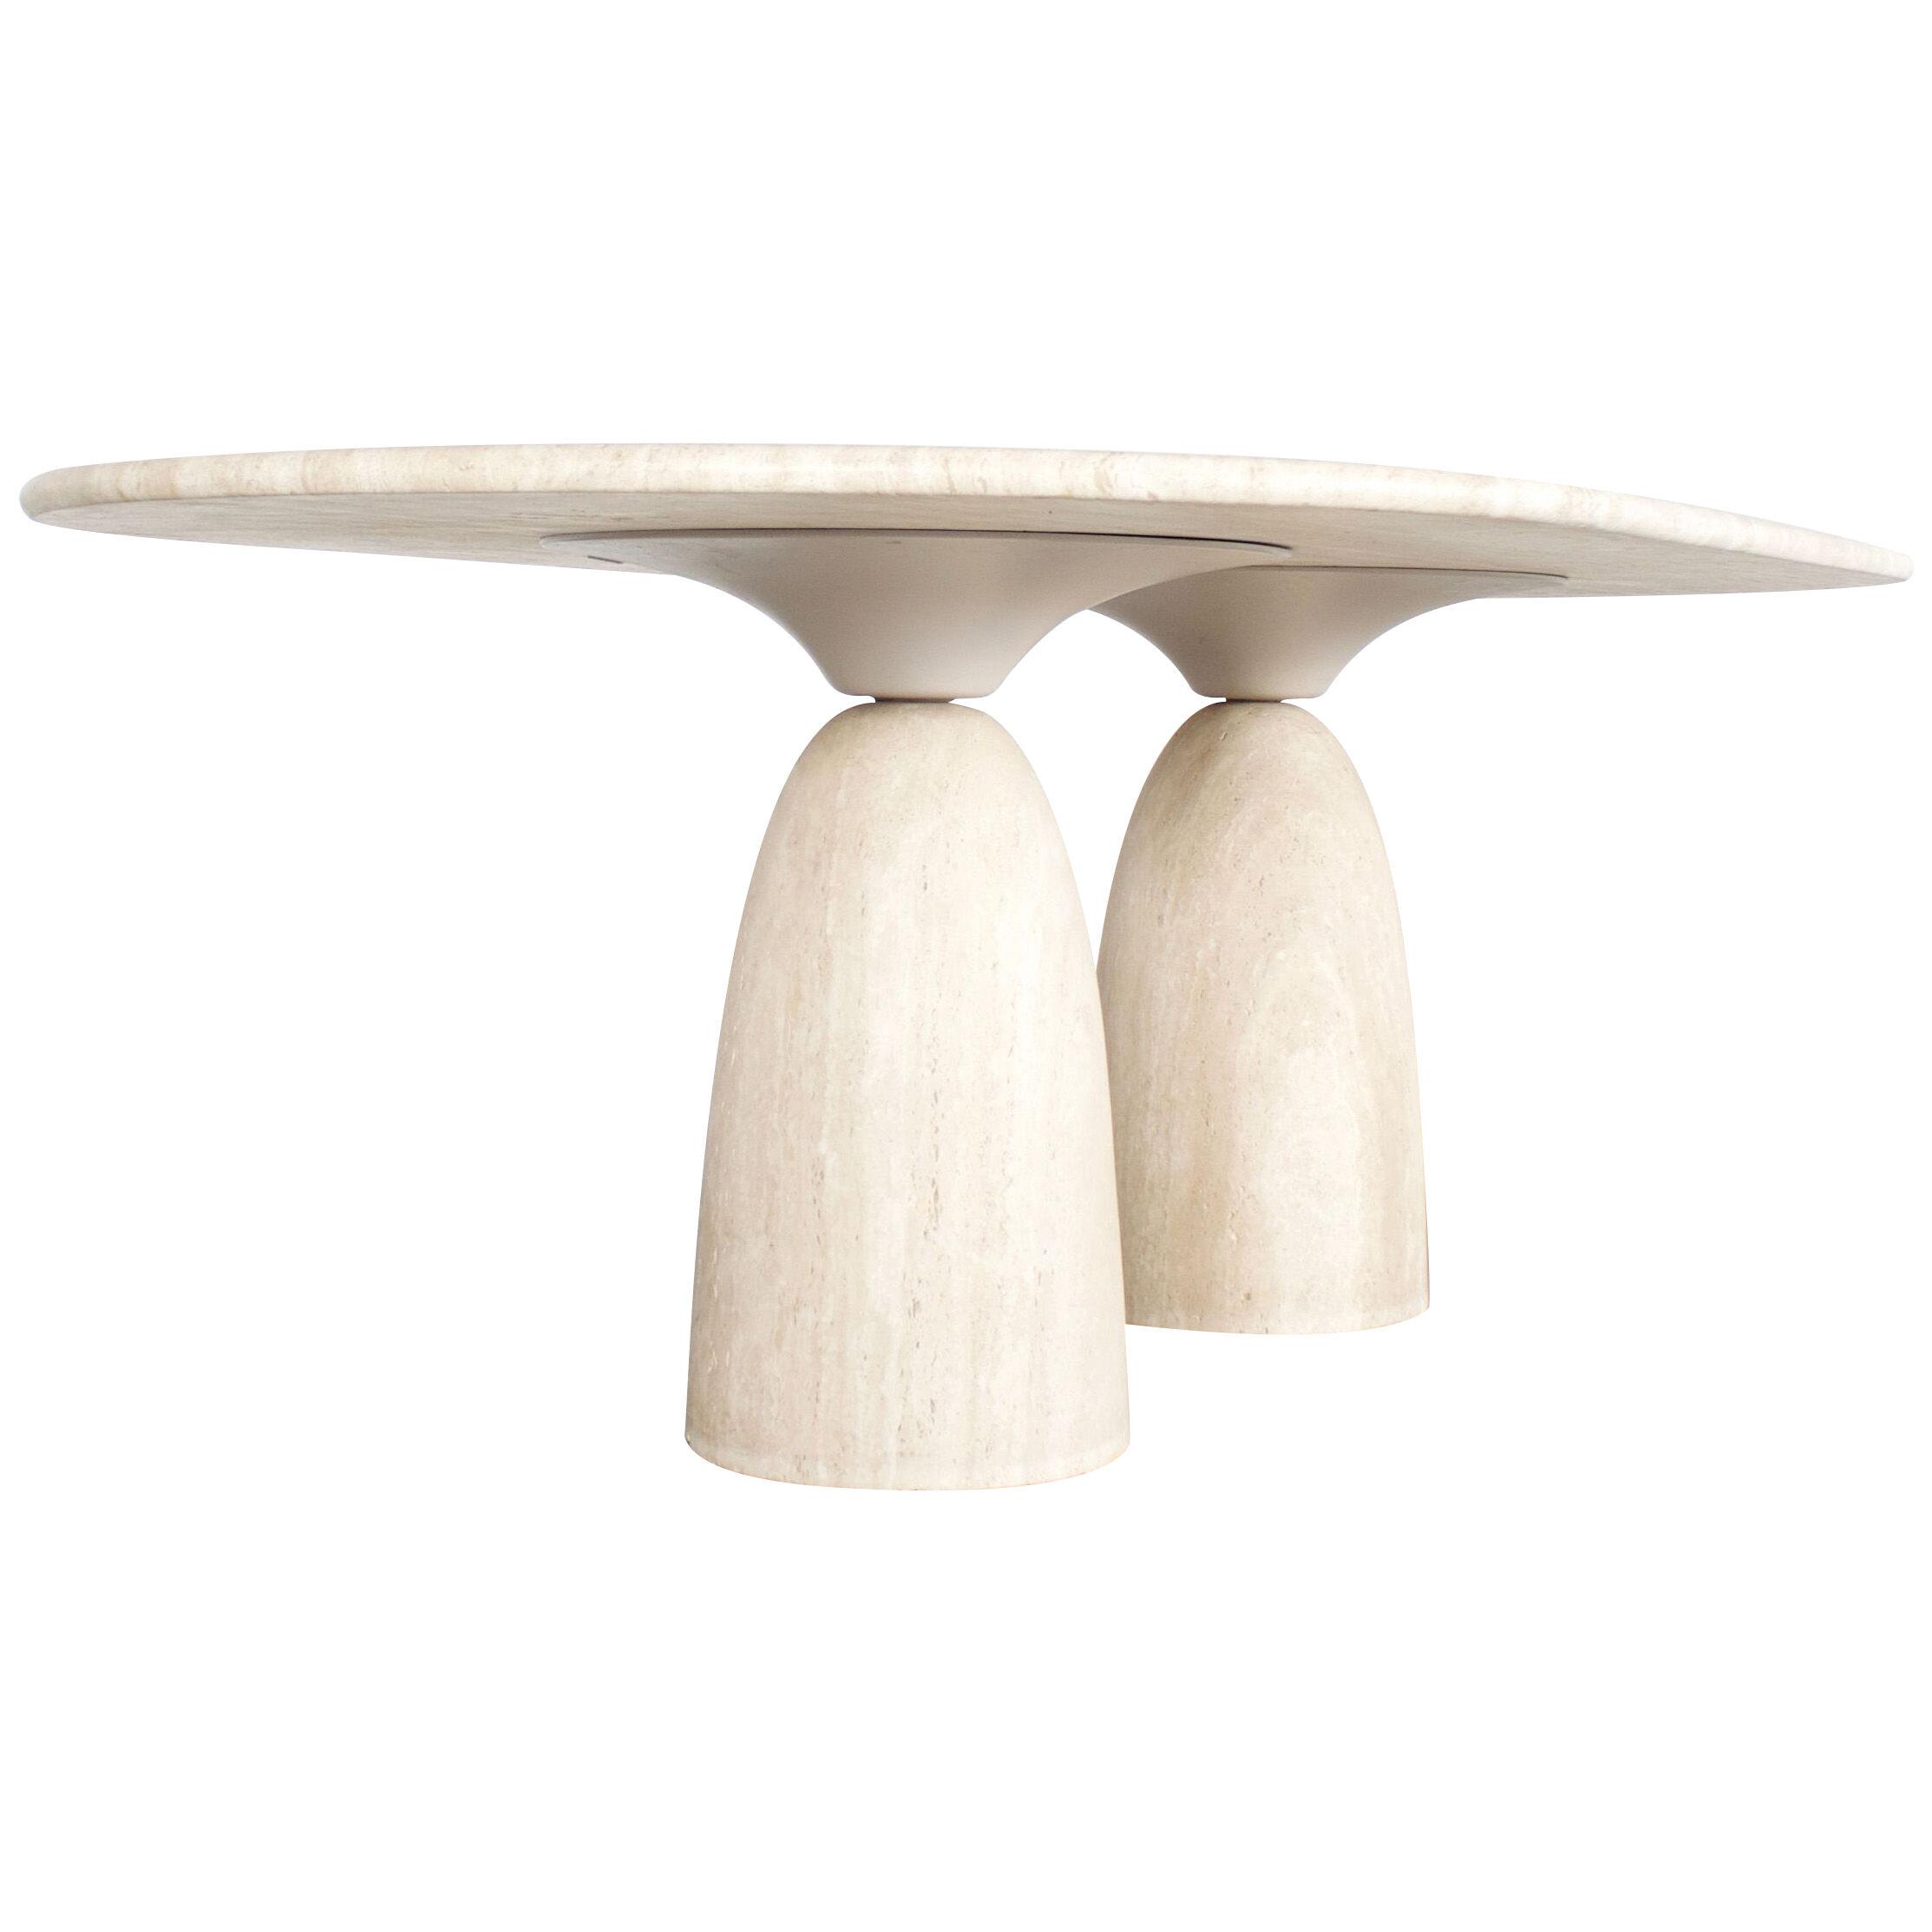 Large Travertine ‘Finale’ Dining Table by Peter Draenert, 1970s